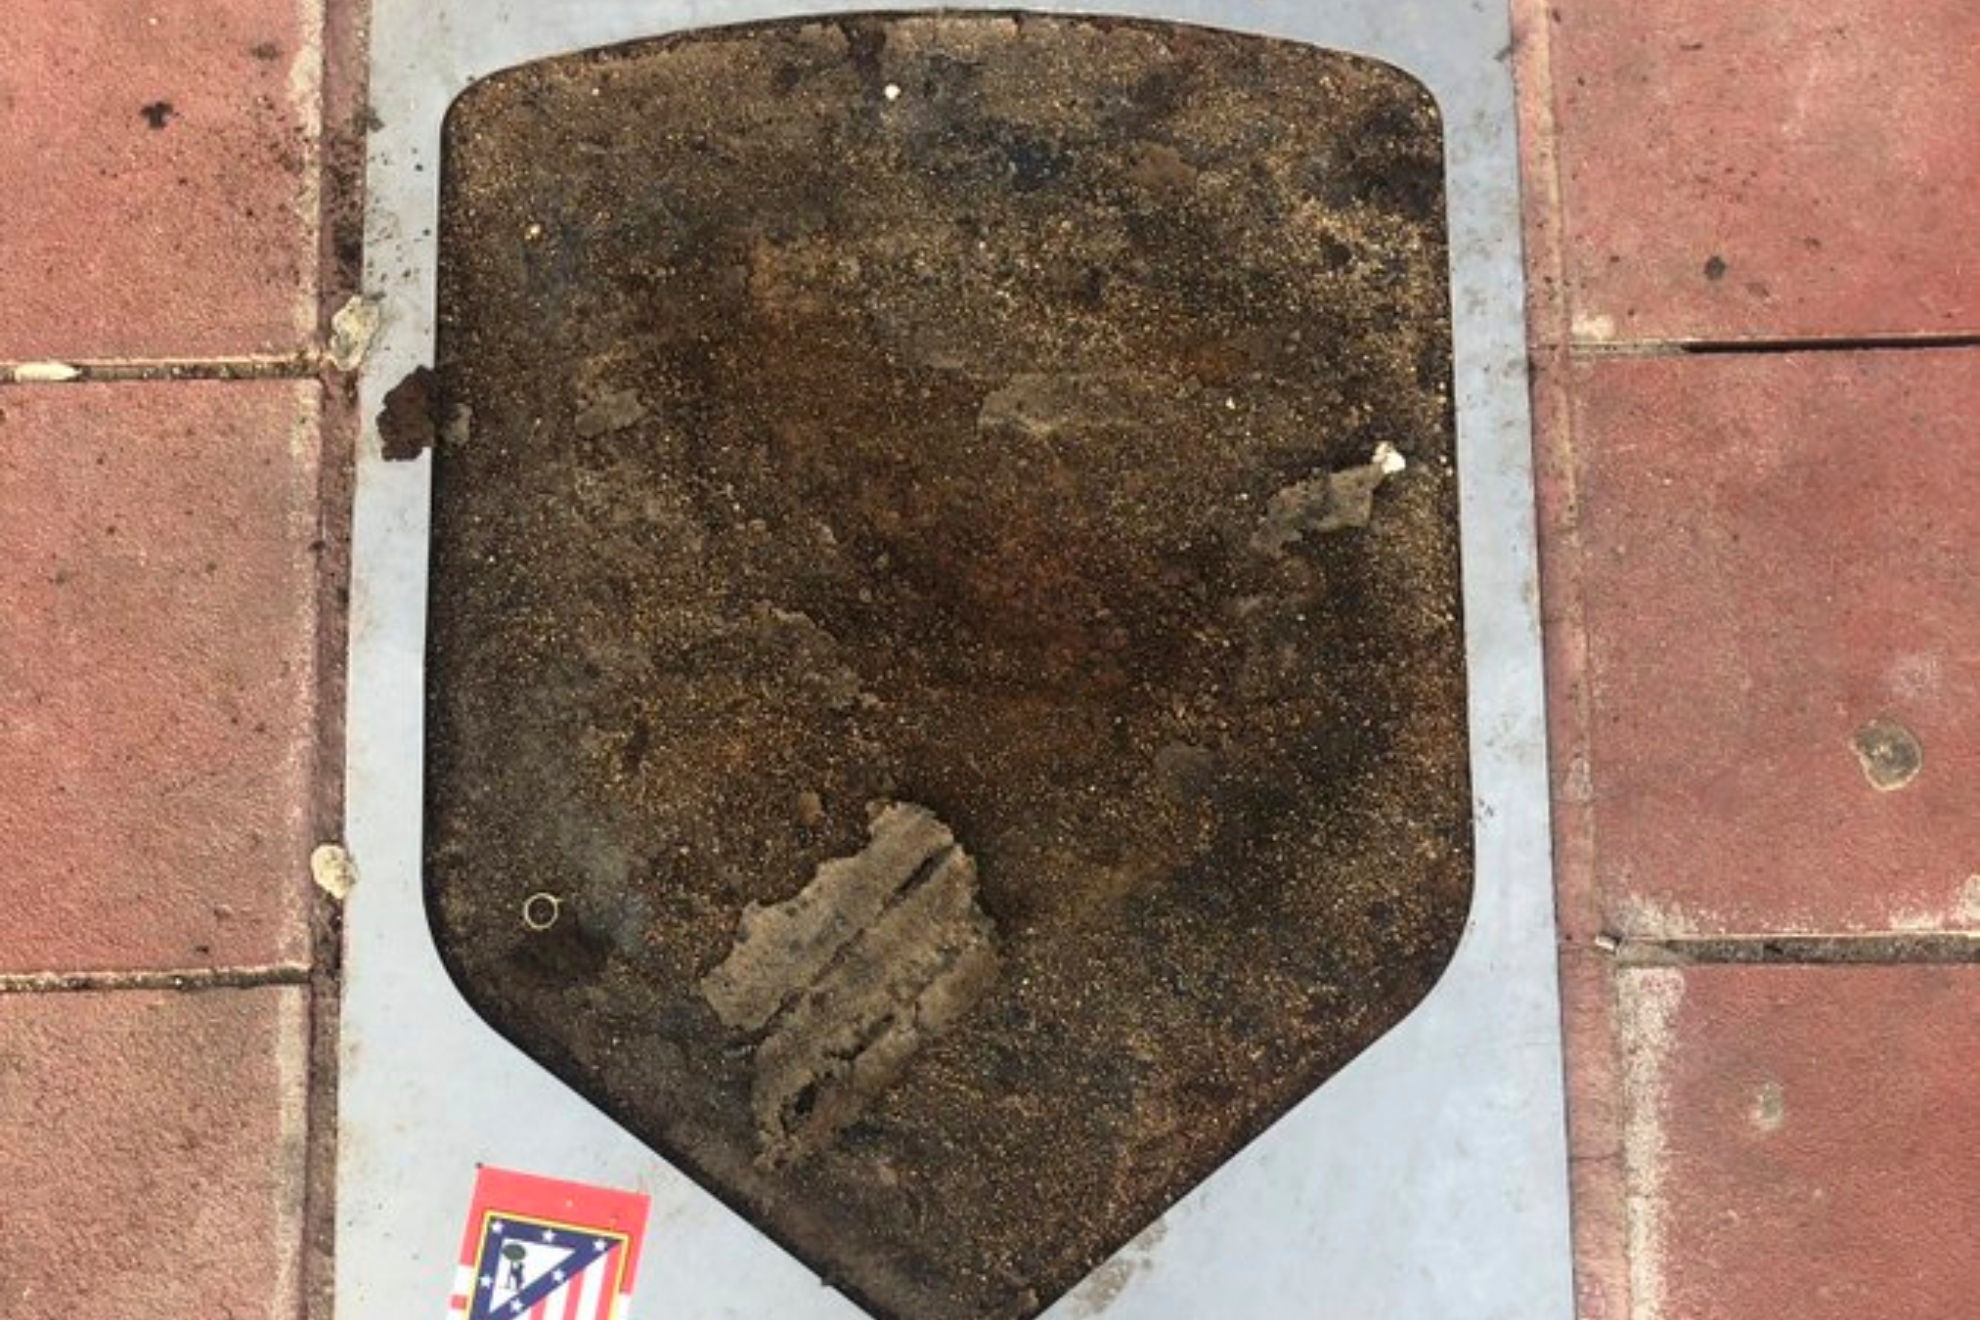 Courtois' plaque at the Metropolitan was ripped off.